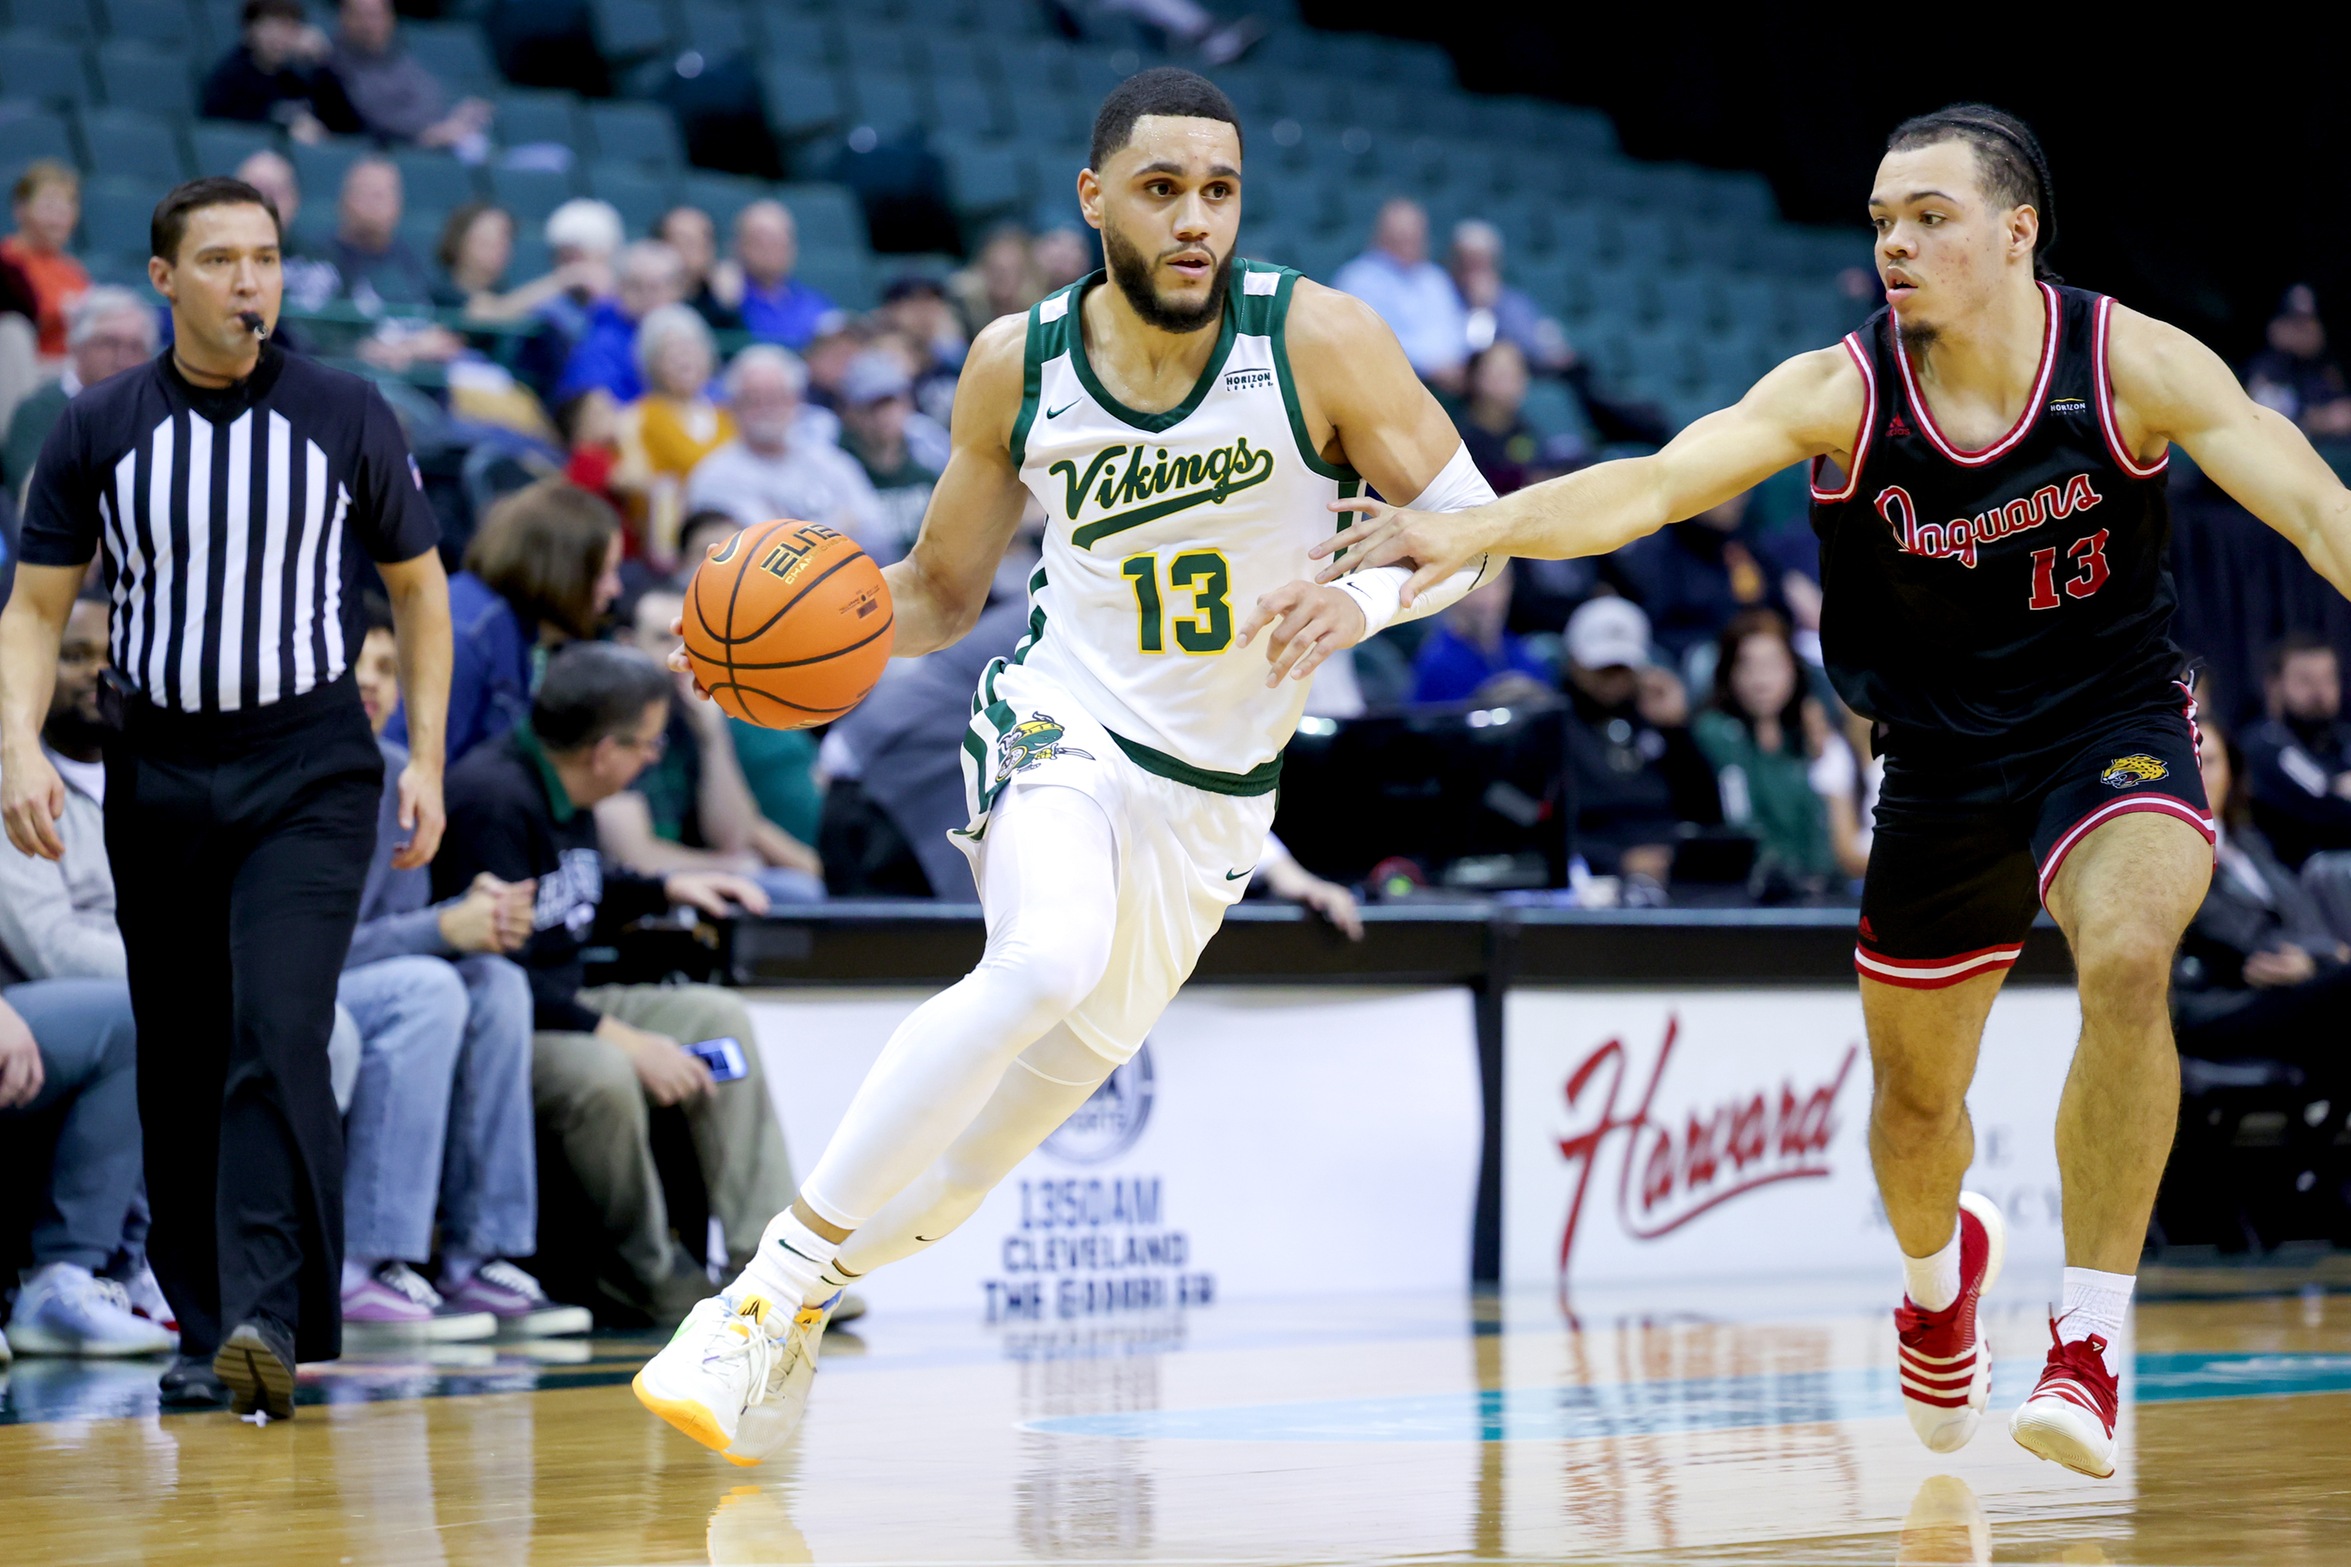 Cleveland State Men's Basketball Hosts IUPUI in First Round of Barbasol Horizon League Tournament